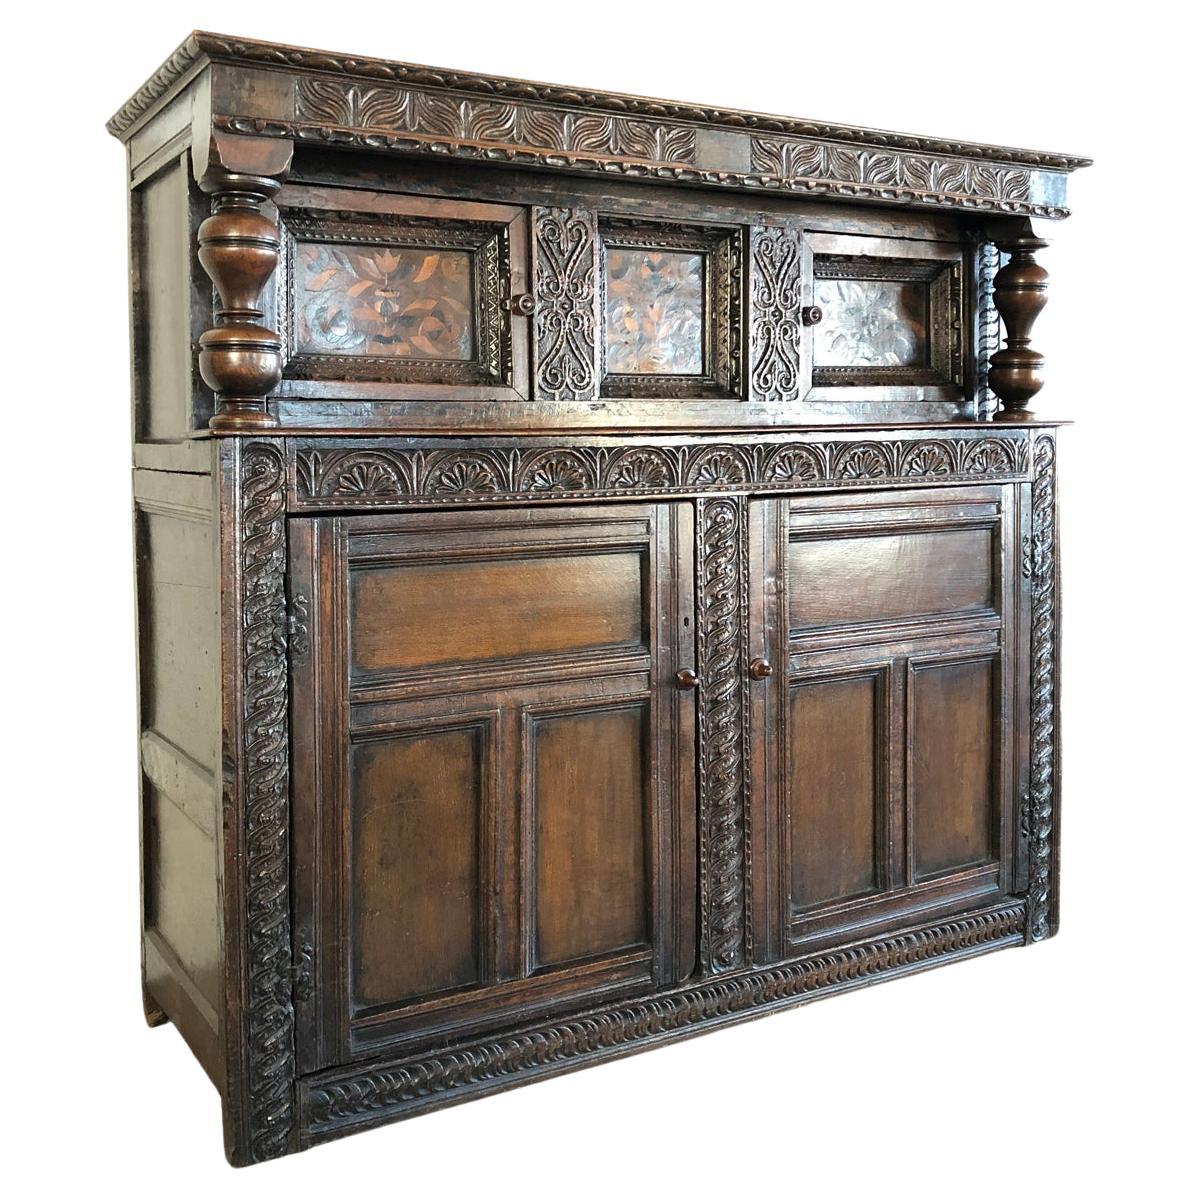 English Charles I 17th Century Oak and Inlaid Court Cupboard